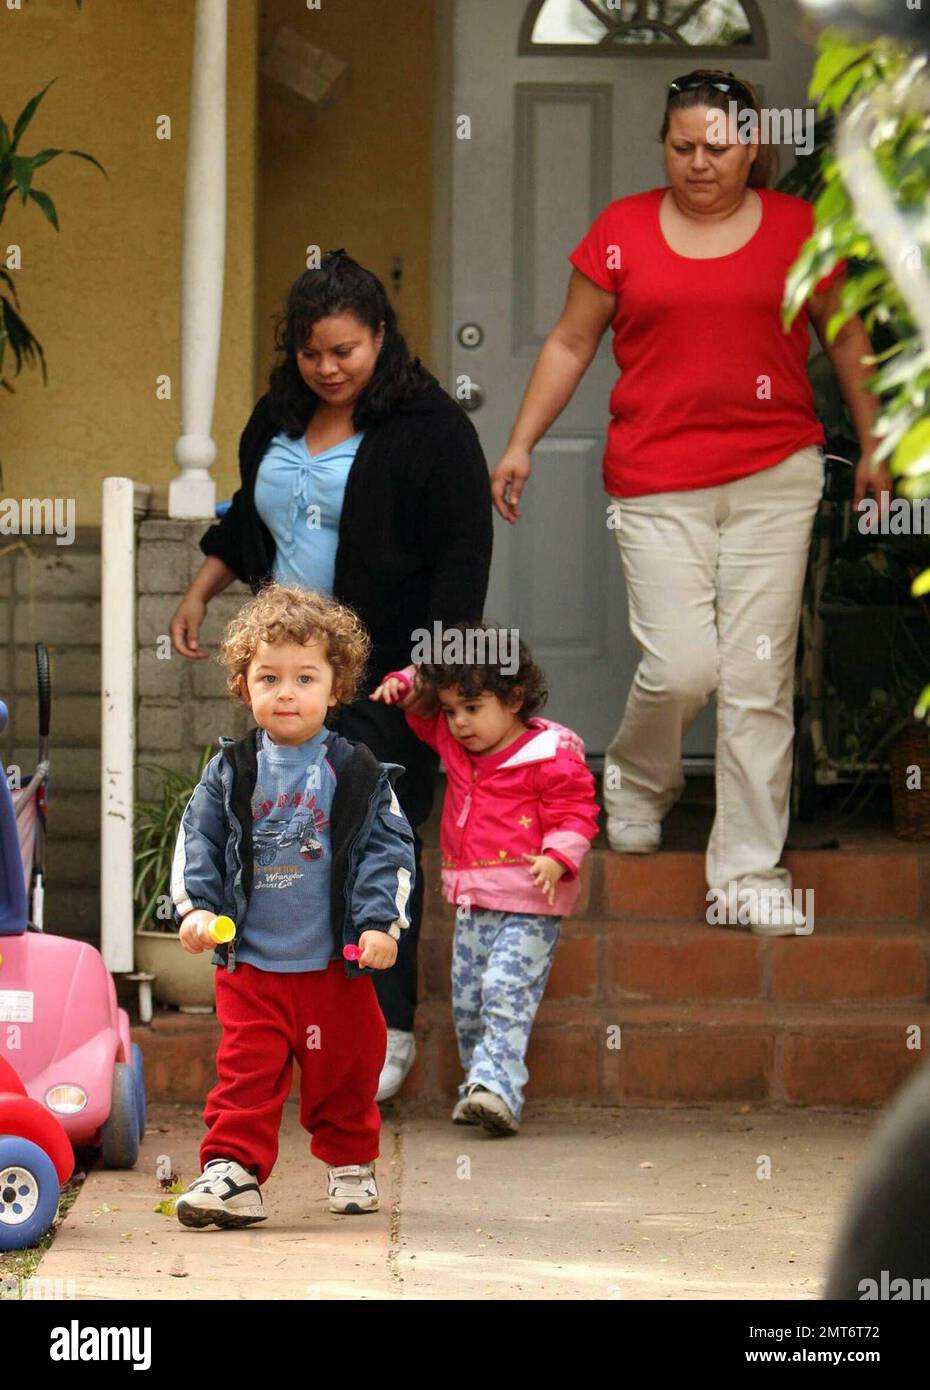 Nadya Suleman, aka Octomom, and her family start the day at home in Whittier, CA.  Nadya was seen sayng goodbye to one of her daughters as her Father, Ed Suleman, brought her out to meet the school bus.  Later in the morning the nannies were seen taking two of Nadya's fourteen children out for a morning stroll.  Nadya gave birth to octuplets on January 26, 2009.  Los Angeles, CA. 3/11/09. Stock Photo